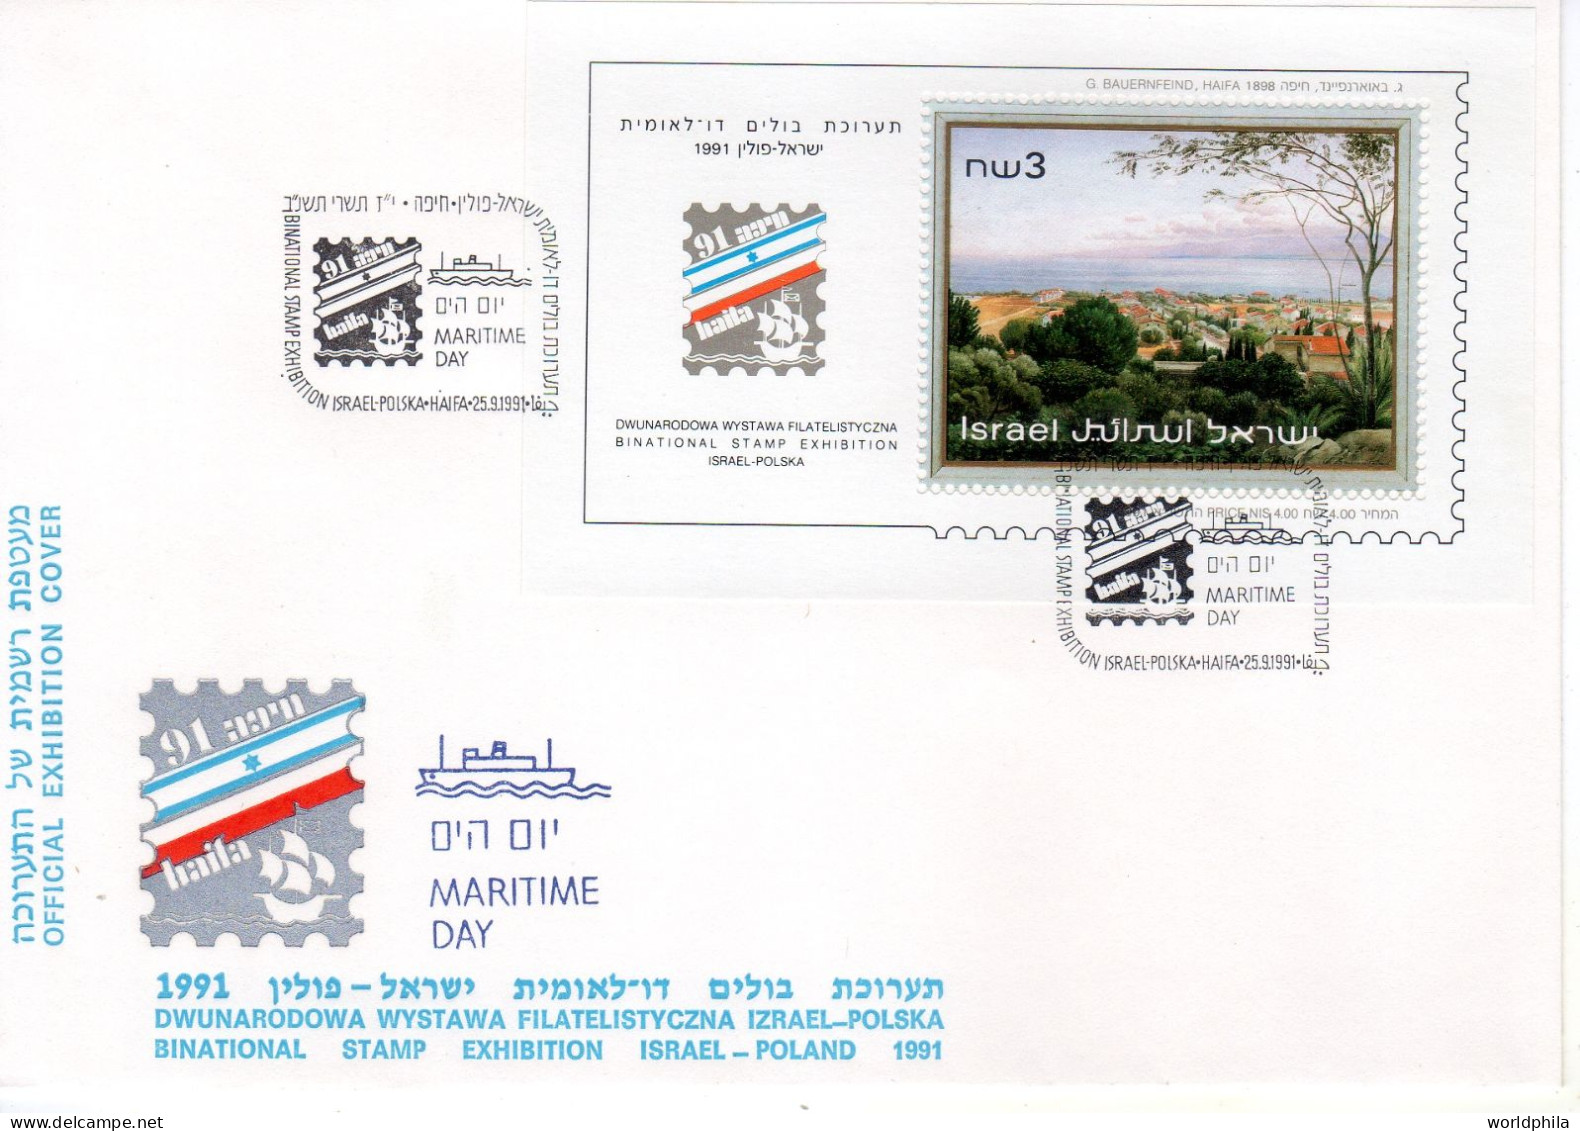 ISRAEL-Poland "Haifa 91" BiNational Stamp Exhibition Cacheted Cover "German Colony" Painting Souvenir Sheet - Lettres & Documents